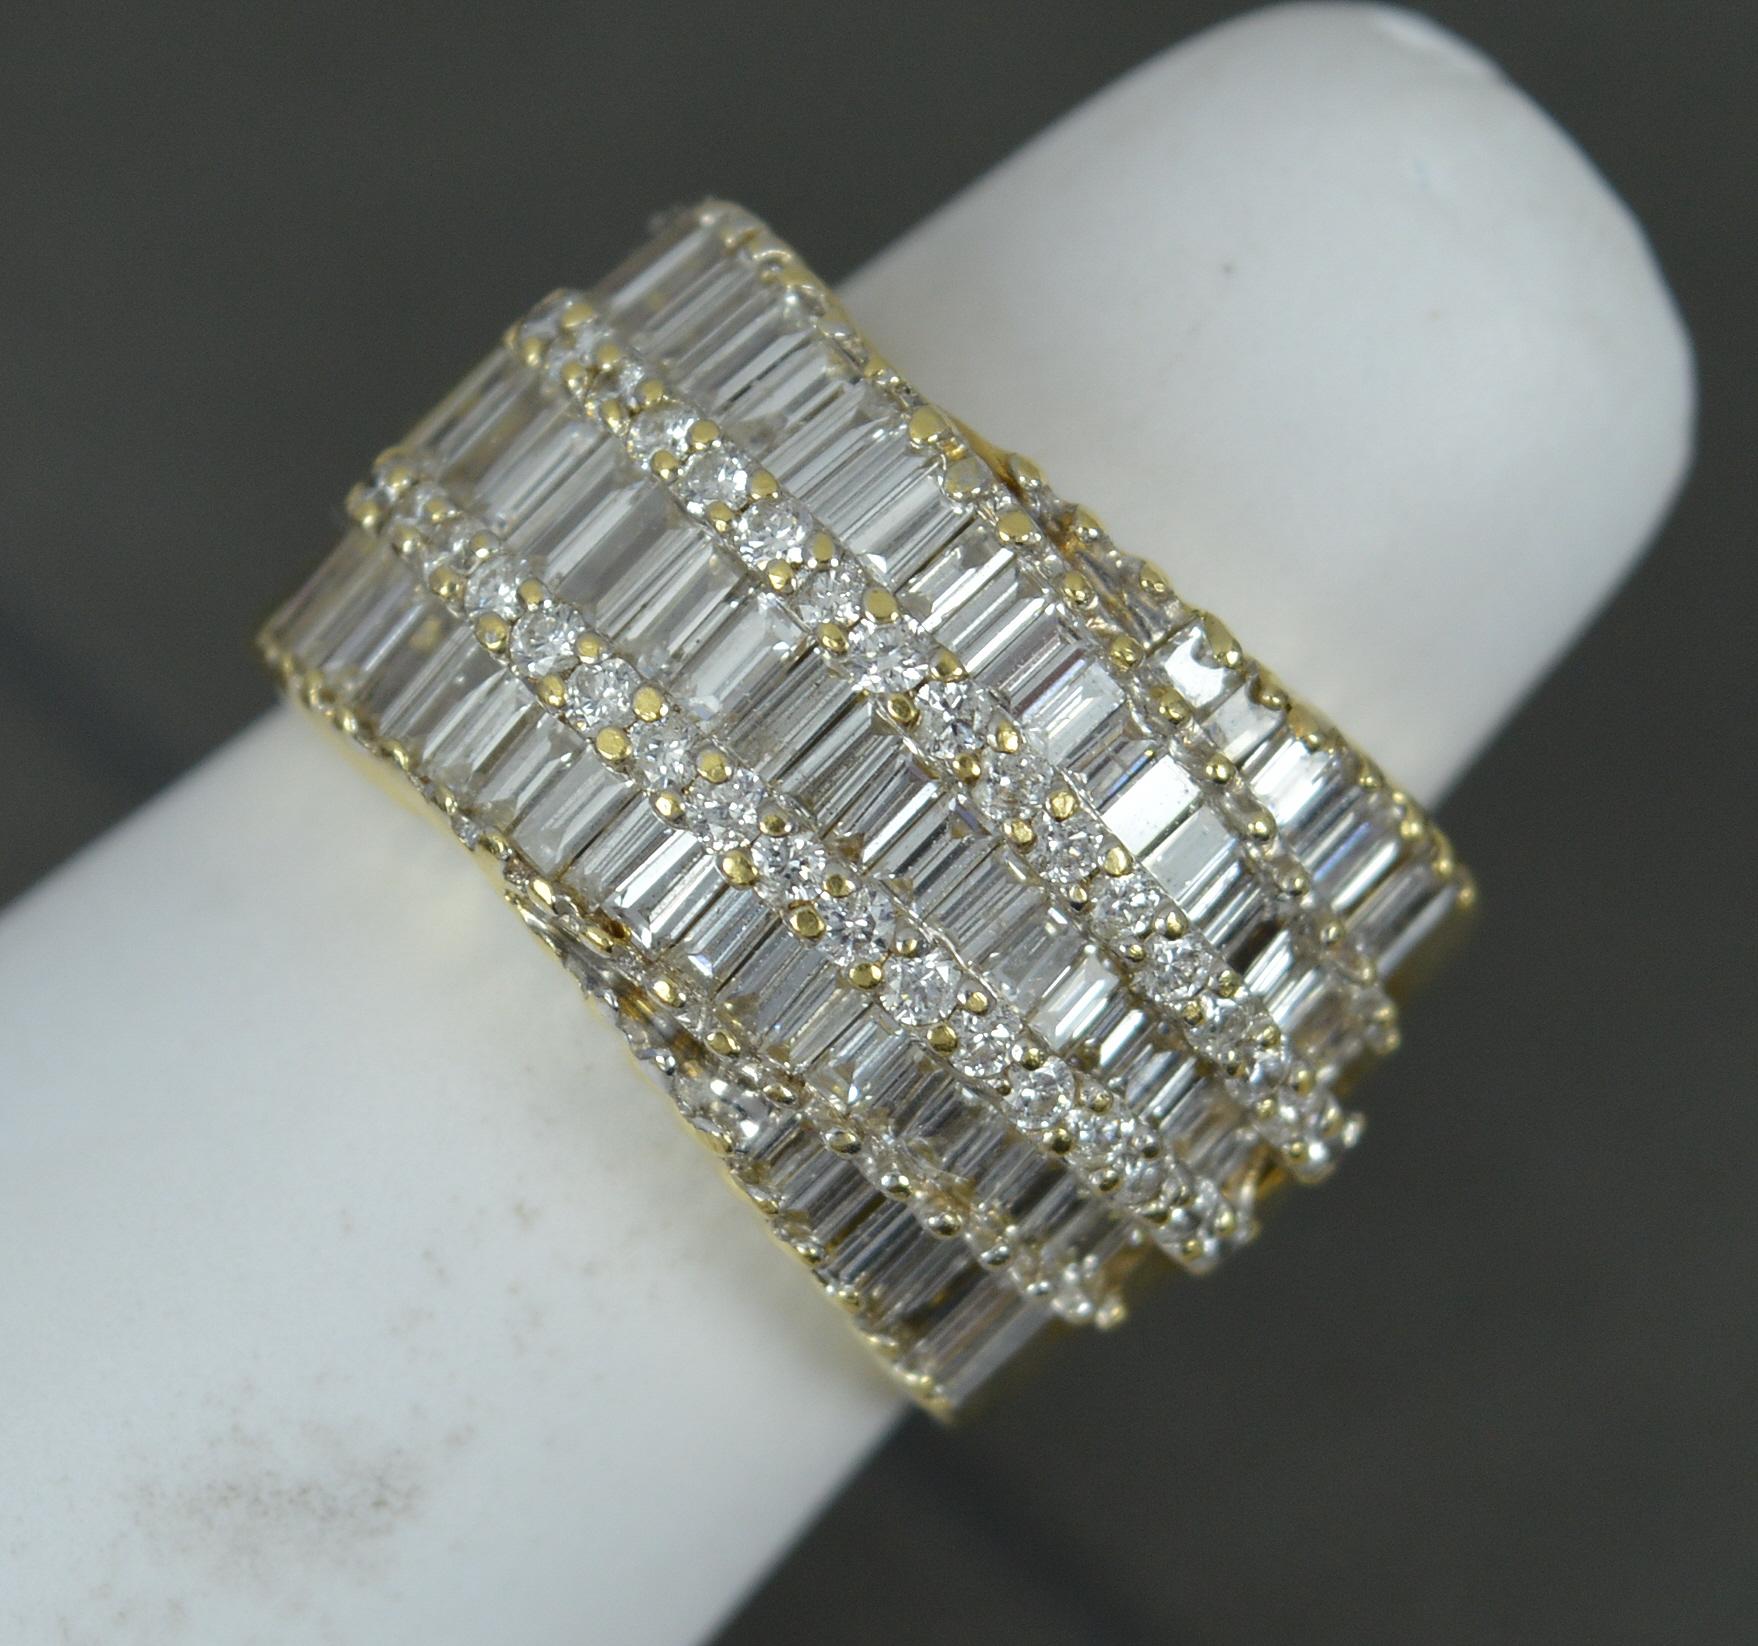 Heavy Bling 3.00 Carat Diamond and 18 Carat Yellow Gold Cluster Ring For Sale 1